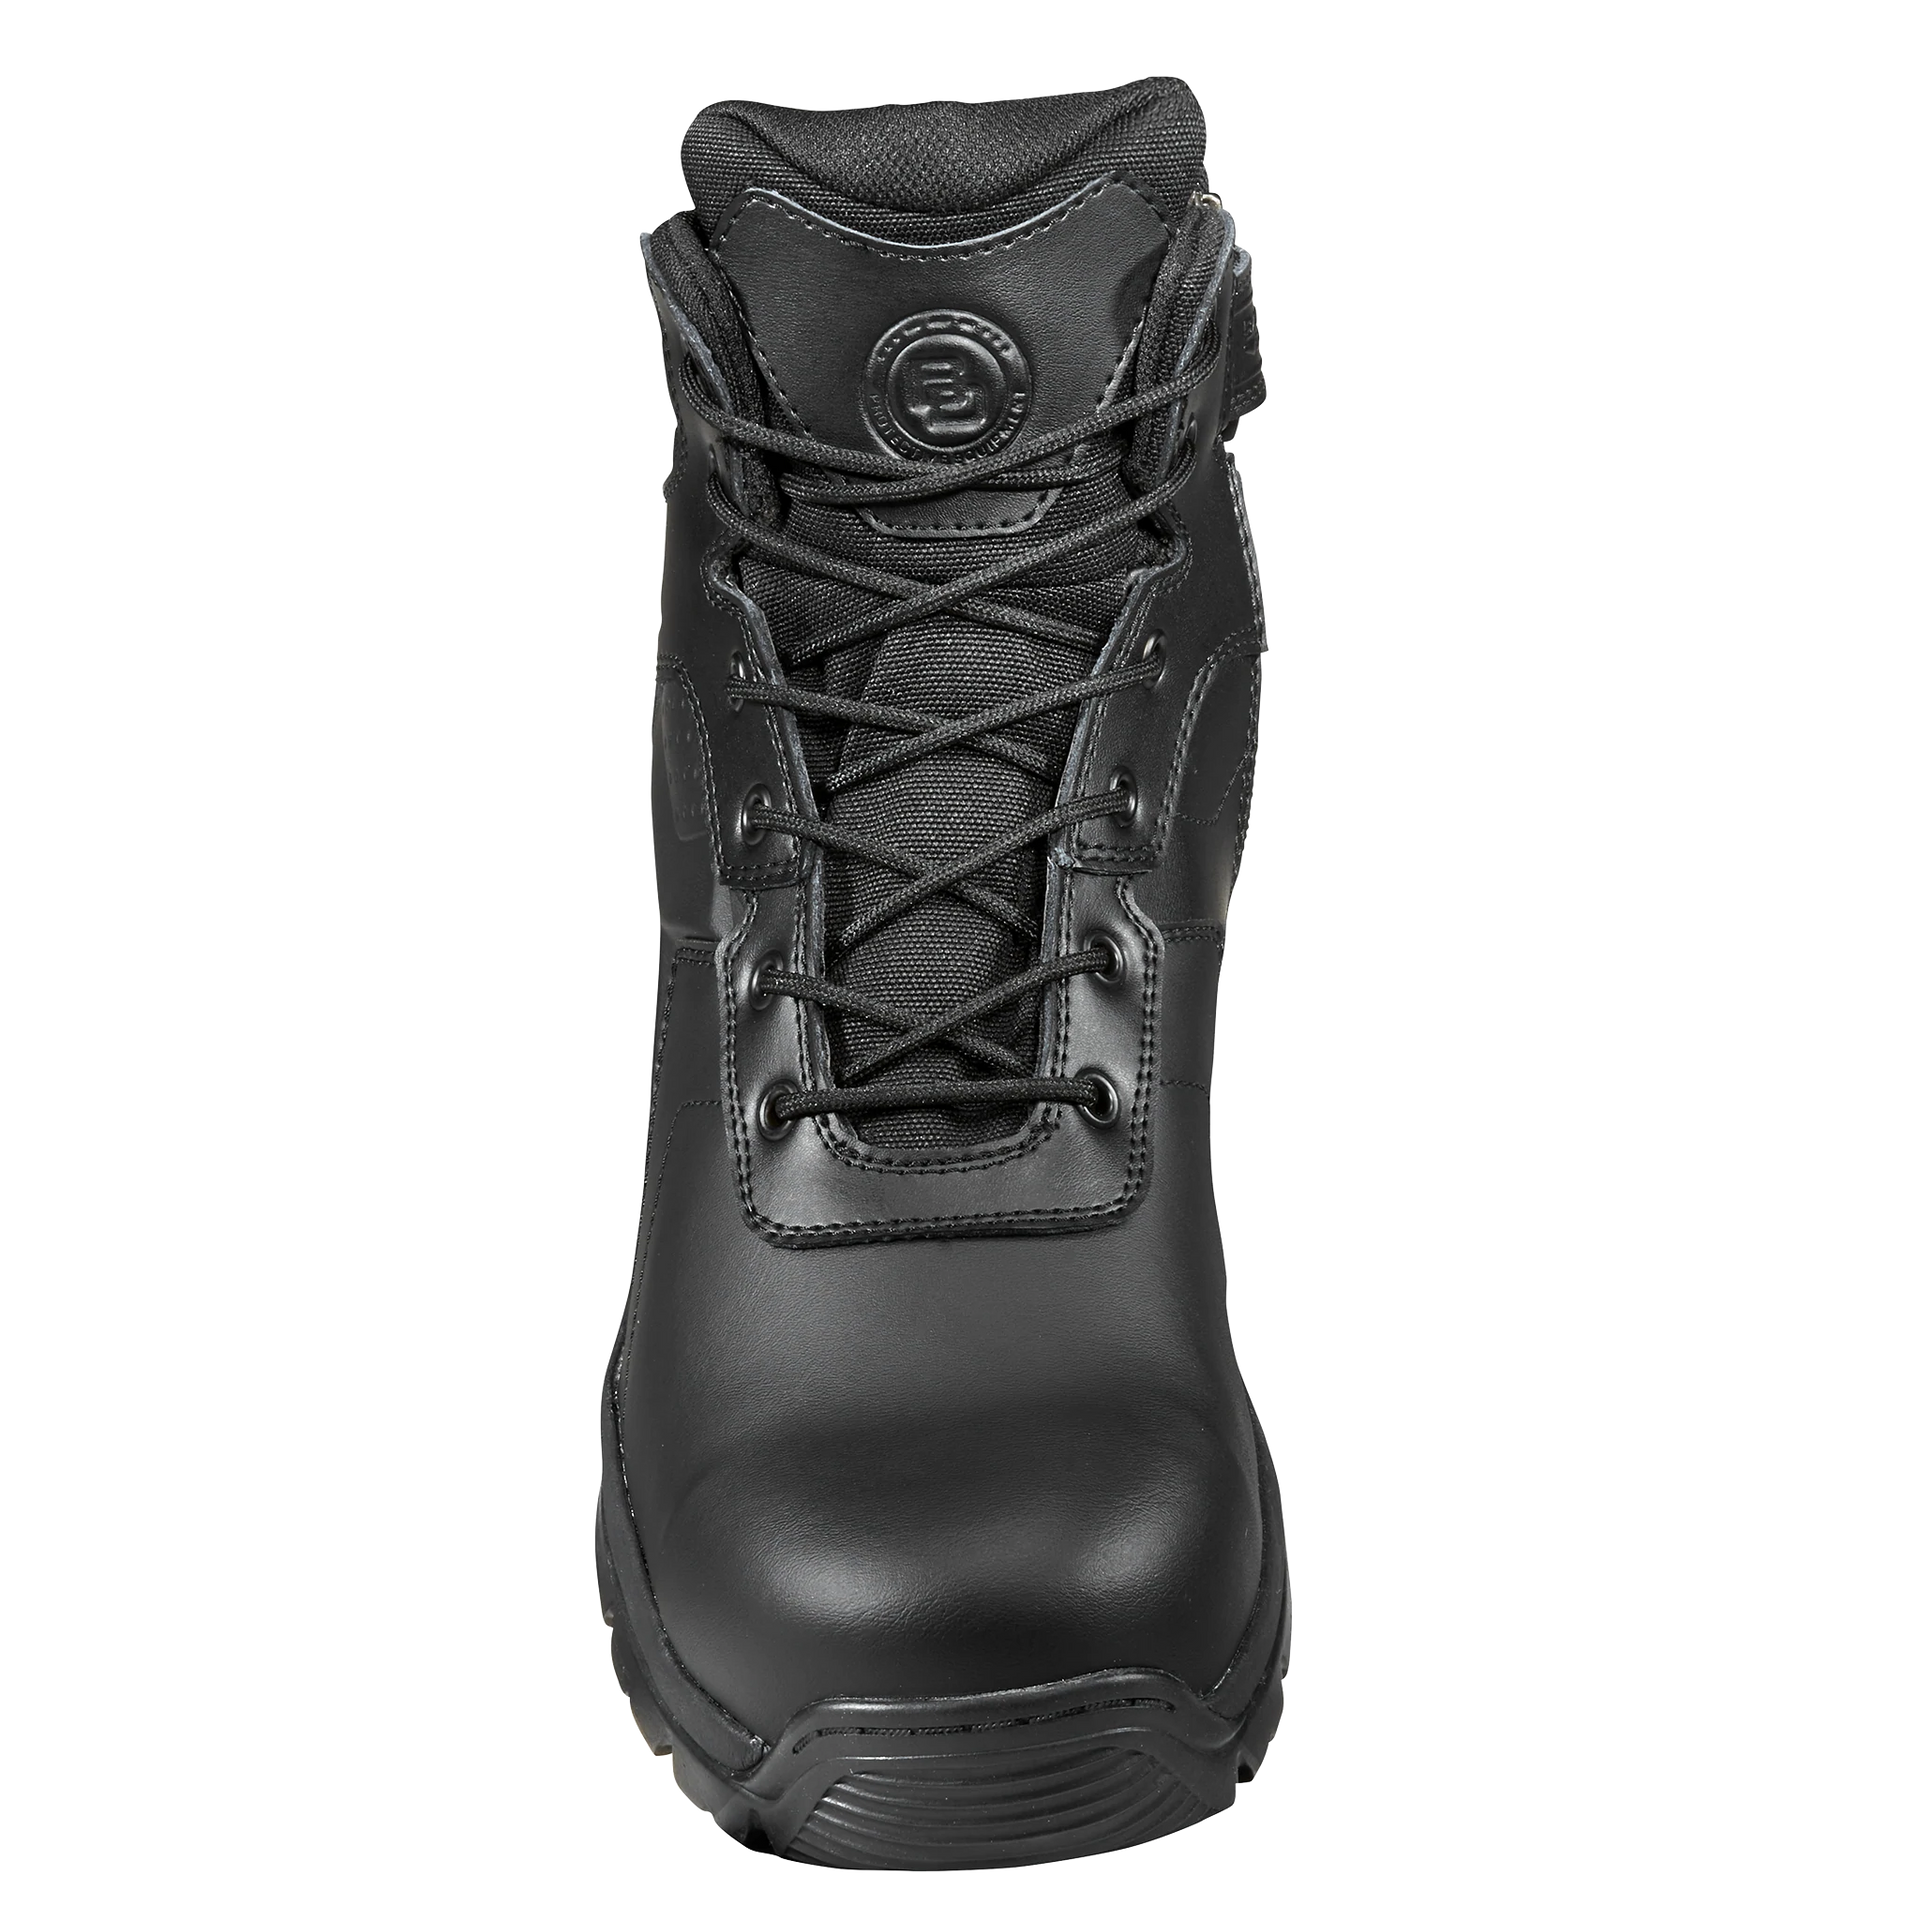 Black Diamond, 6" Waterproof Tactical Boot- Side Zip Comp Safety Toe | The Fire Center | The Fire Store | Store | Fuego Fire Center | Firefighter Gear | Our men's waterproof YKK side zip tactical boot with composite safety toe is light and flexible. The EVA mid-sole provides shock absorbing comfort while the fiberglass shank offers support and torsional rigidity